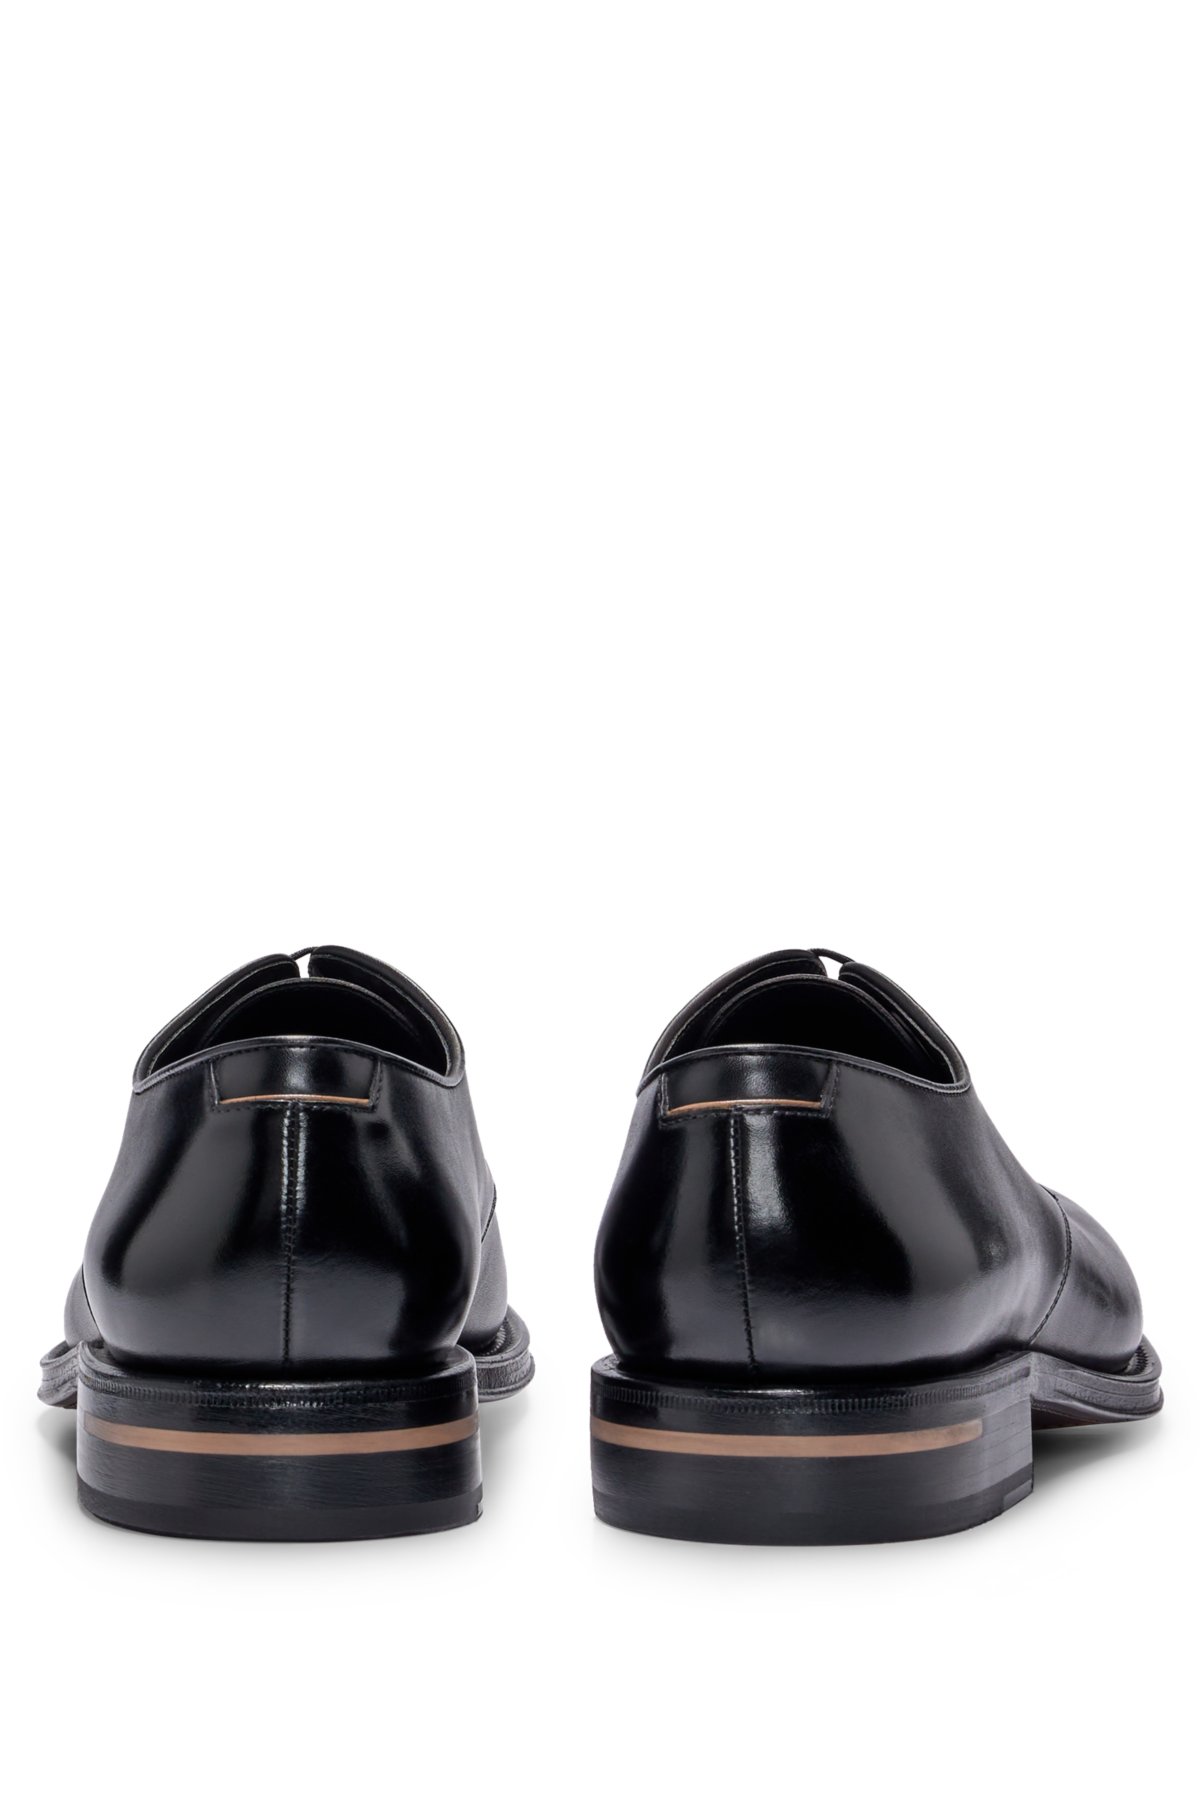 BOSS - Italian-made Derby shoes in burnished leather